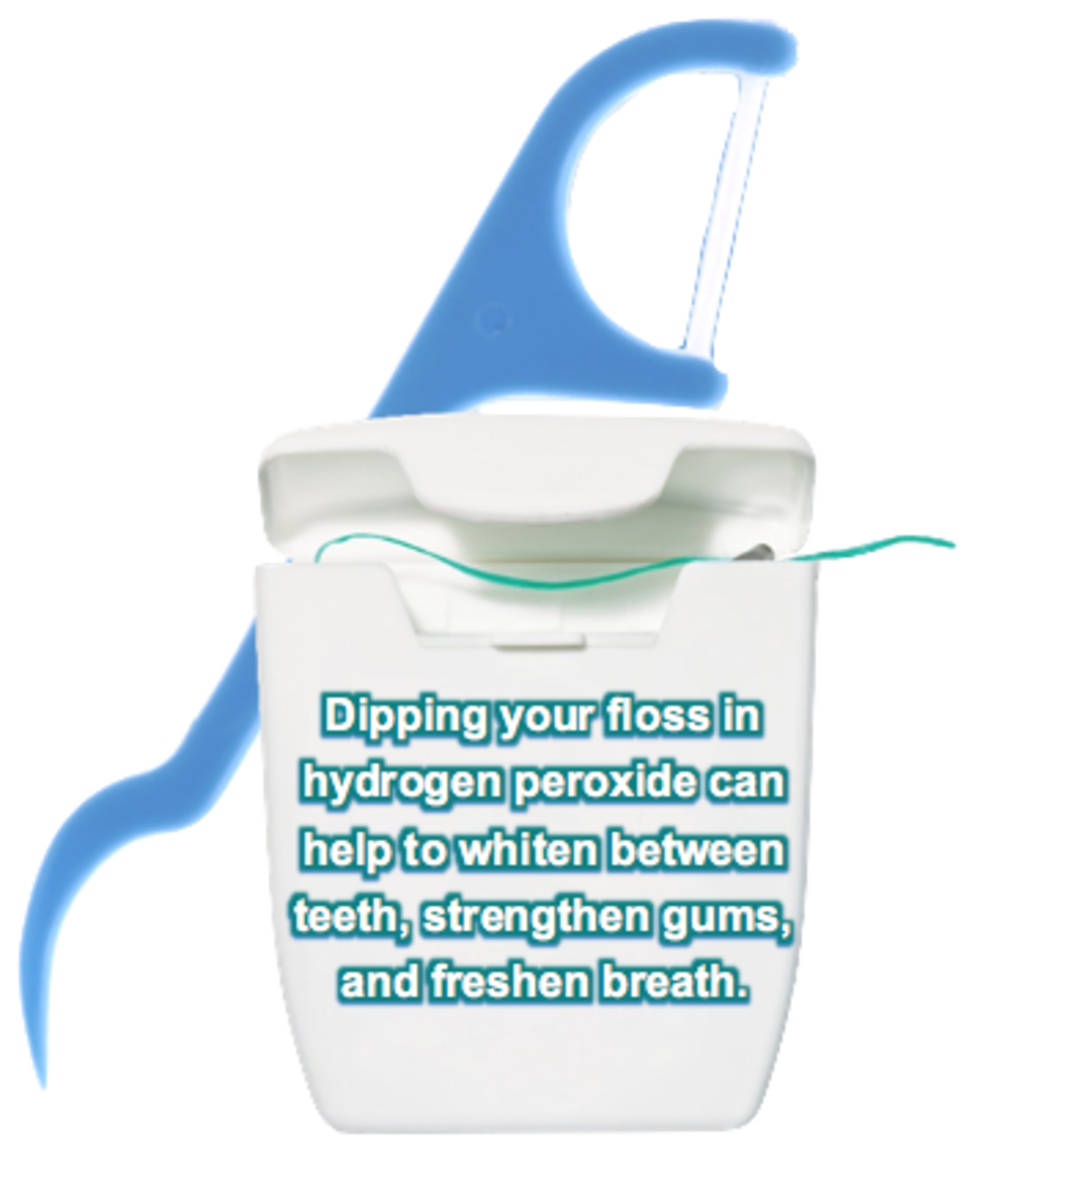 Dipping your floss in hydrogen peroxide can help to whiten between your teeth, strengthen your gums, and freshen your breath.